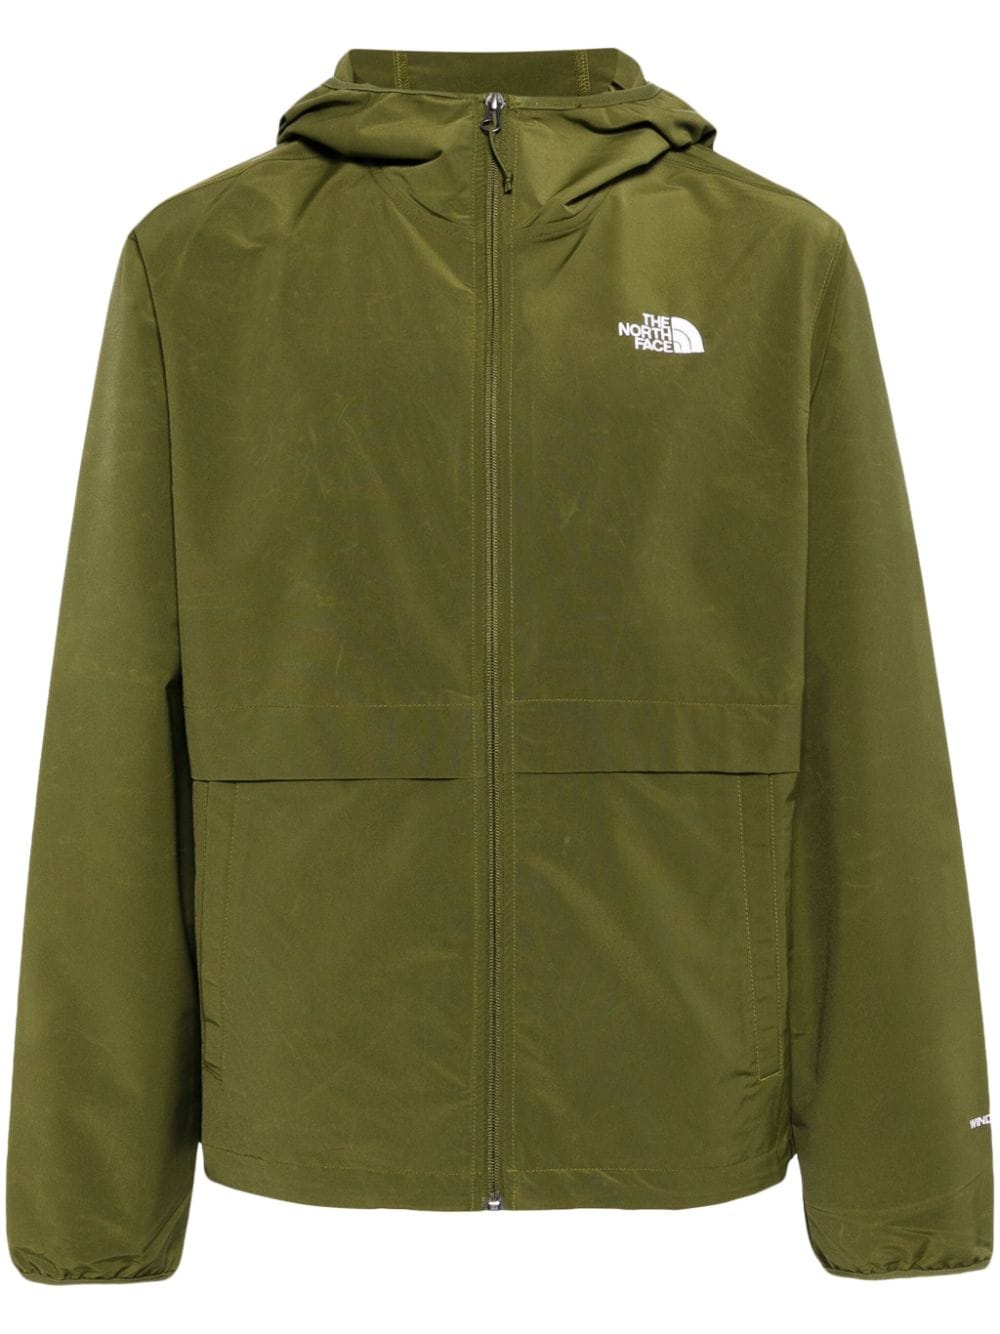 The North Face Easy Wind hooded jacket - Green von The North Face